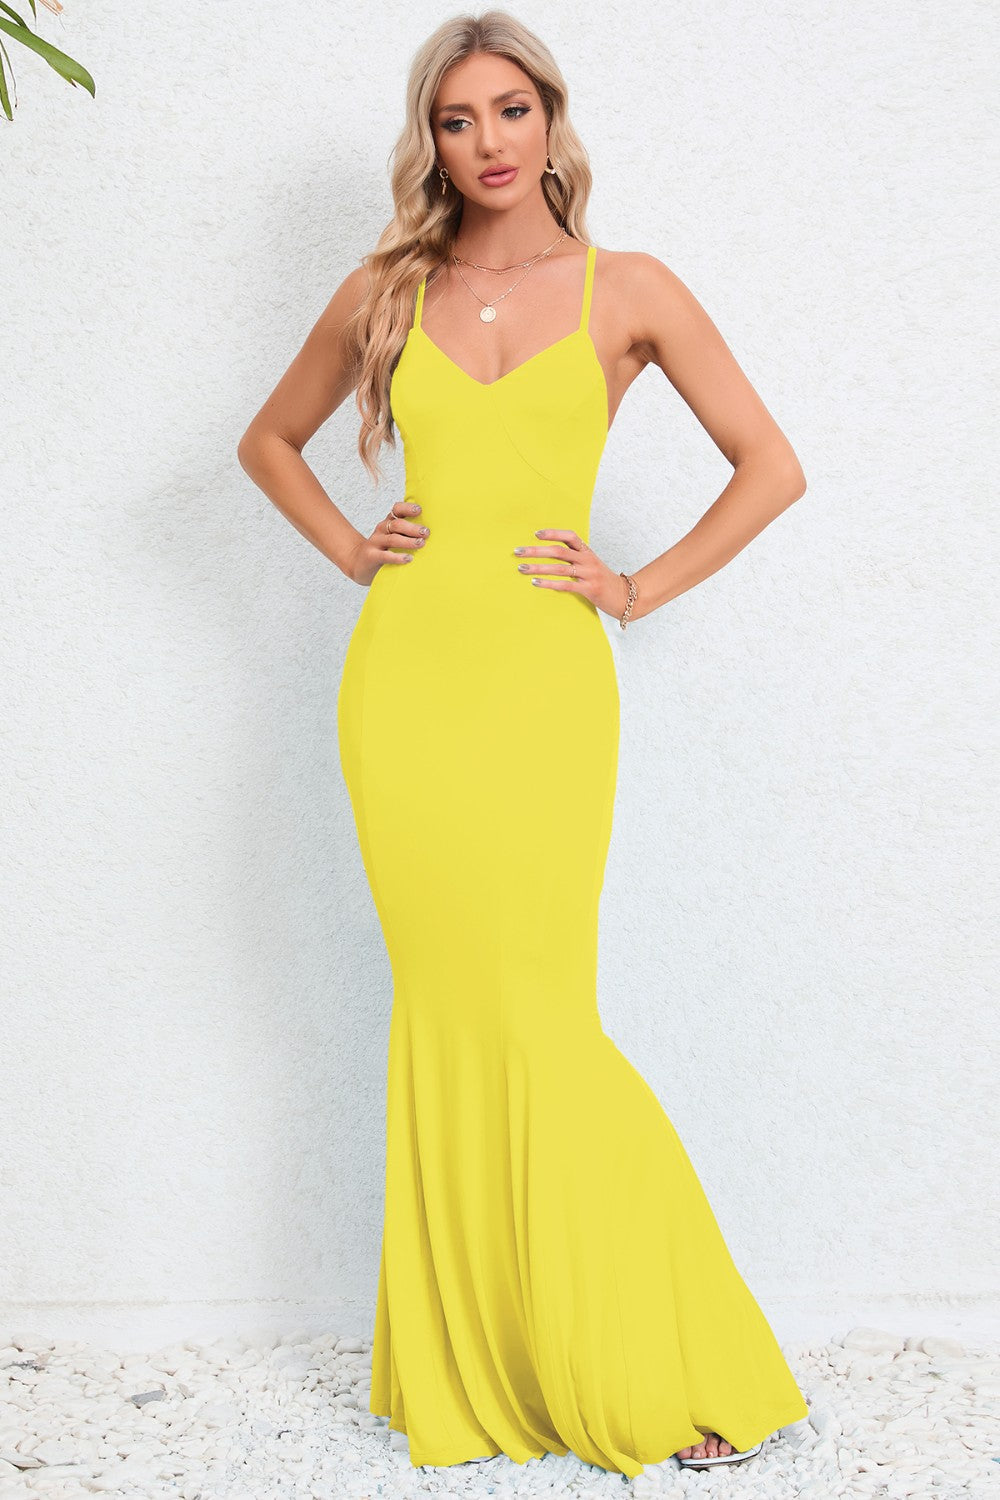 Dazzle in the Crisscross Fishtail Dress, available in sky blue and canary yellow for unforgettable elegance at any event.